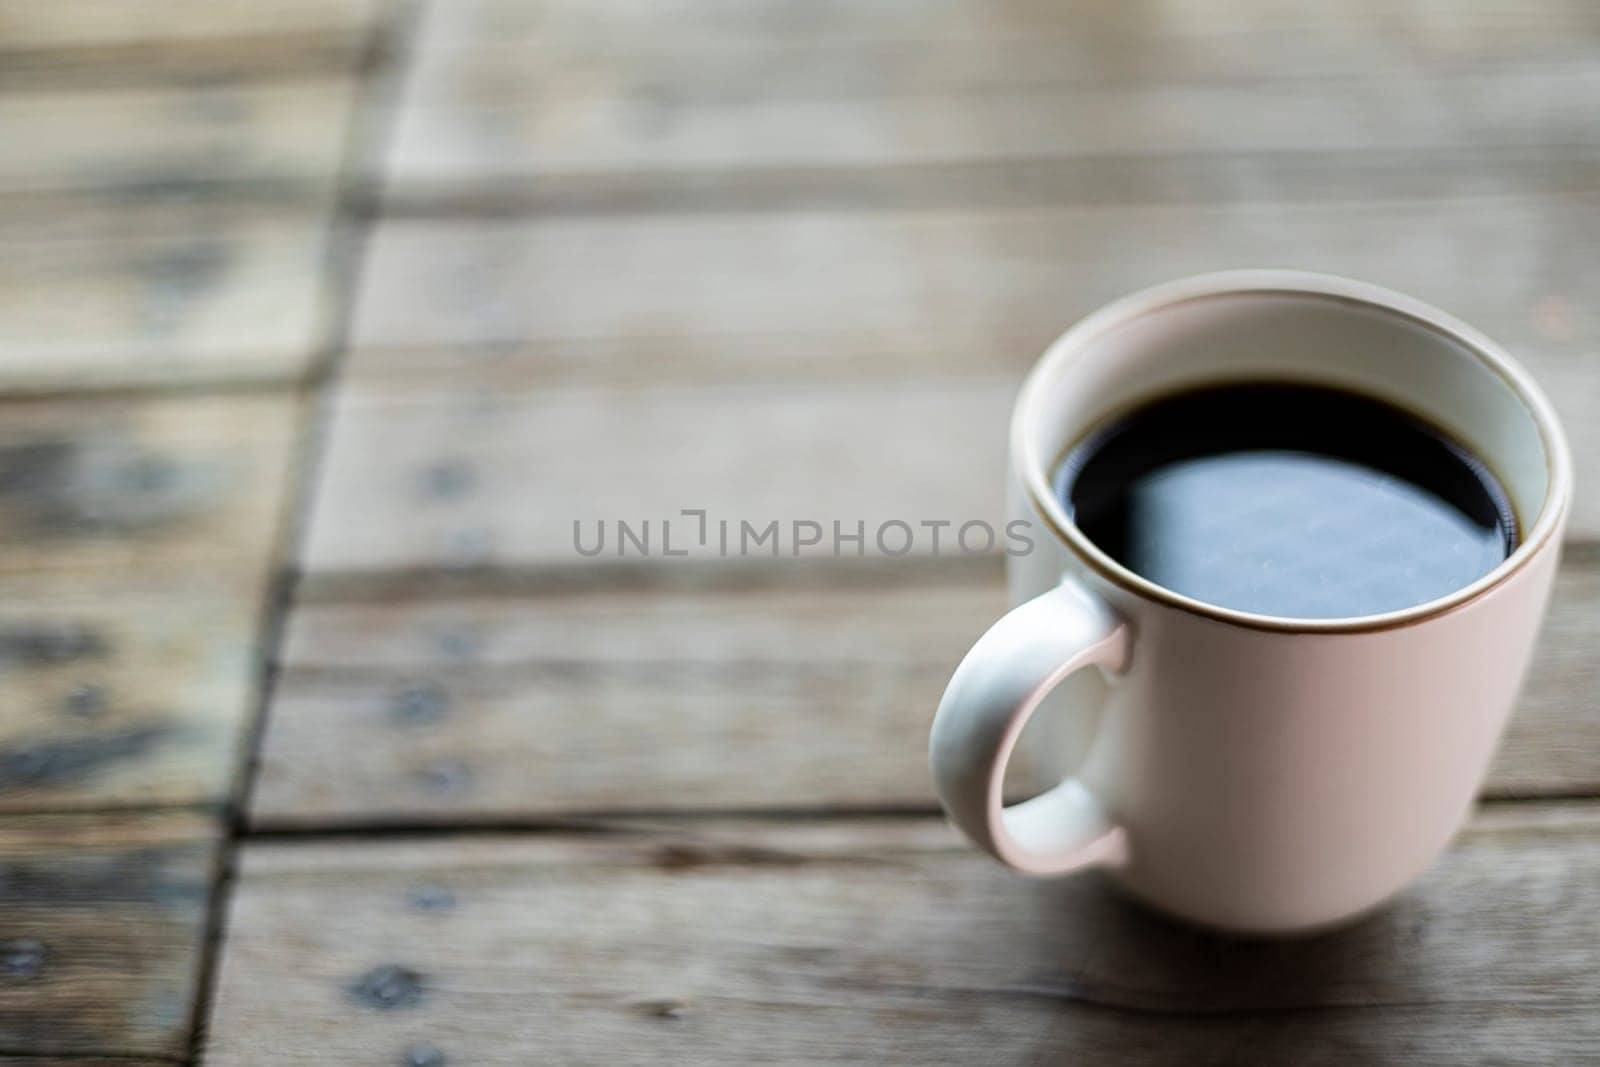 Coffee Mug On Wooden Table, Backgrounds for advertisements and wallpapers in drink and lifestyle scenes. Actual images in decorating ideas.